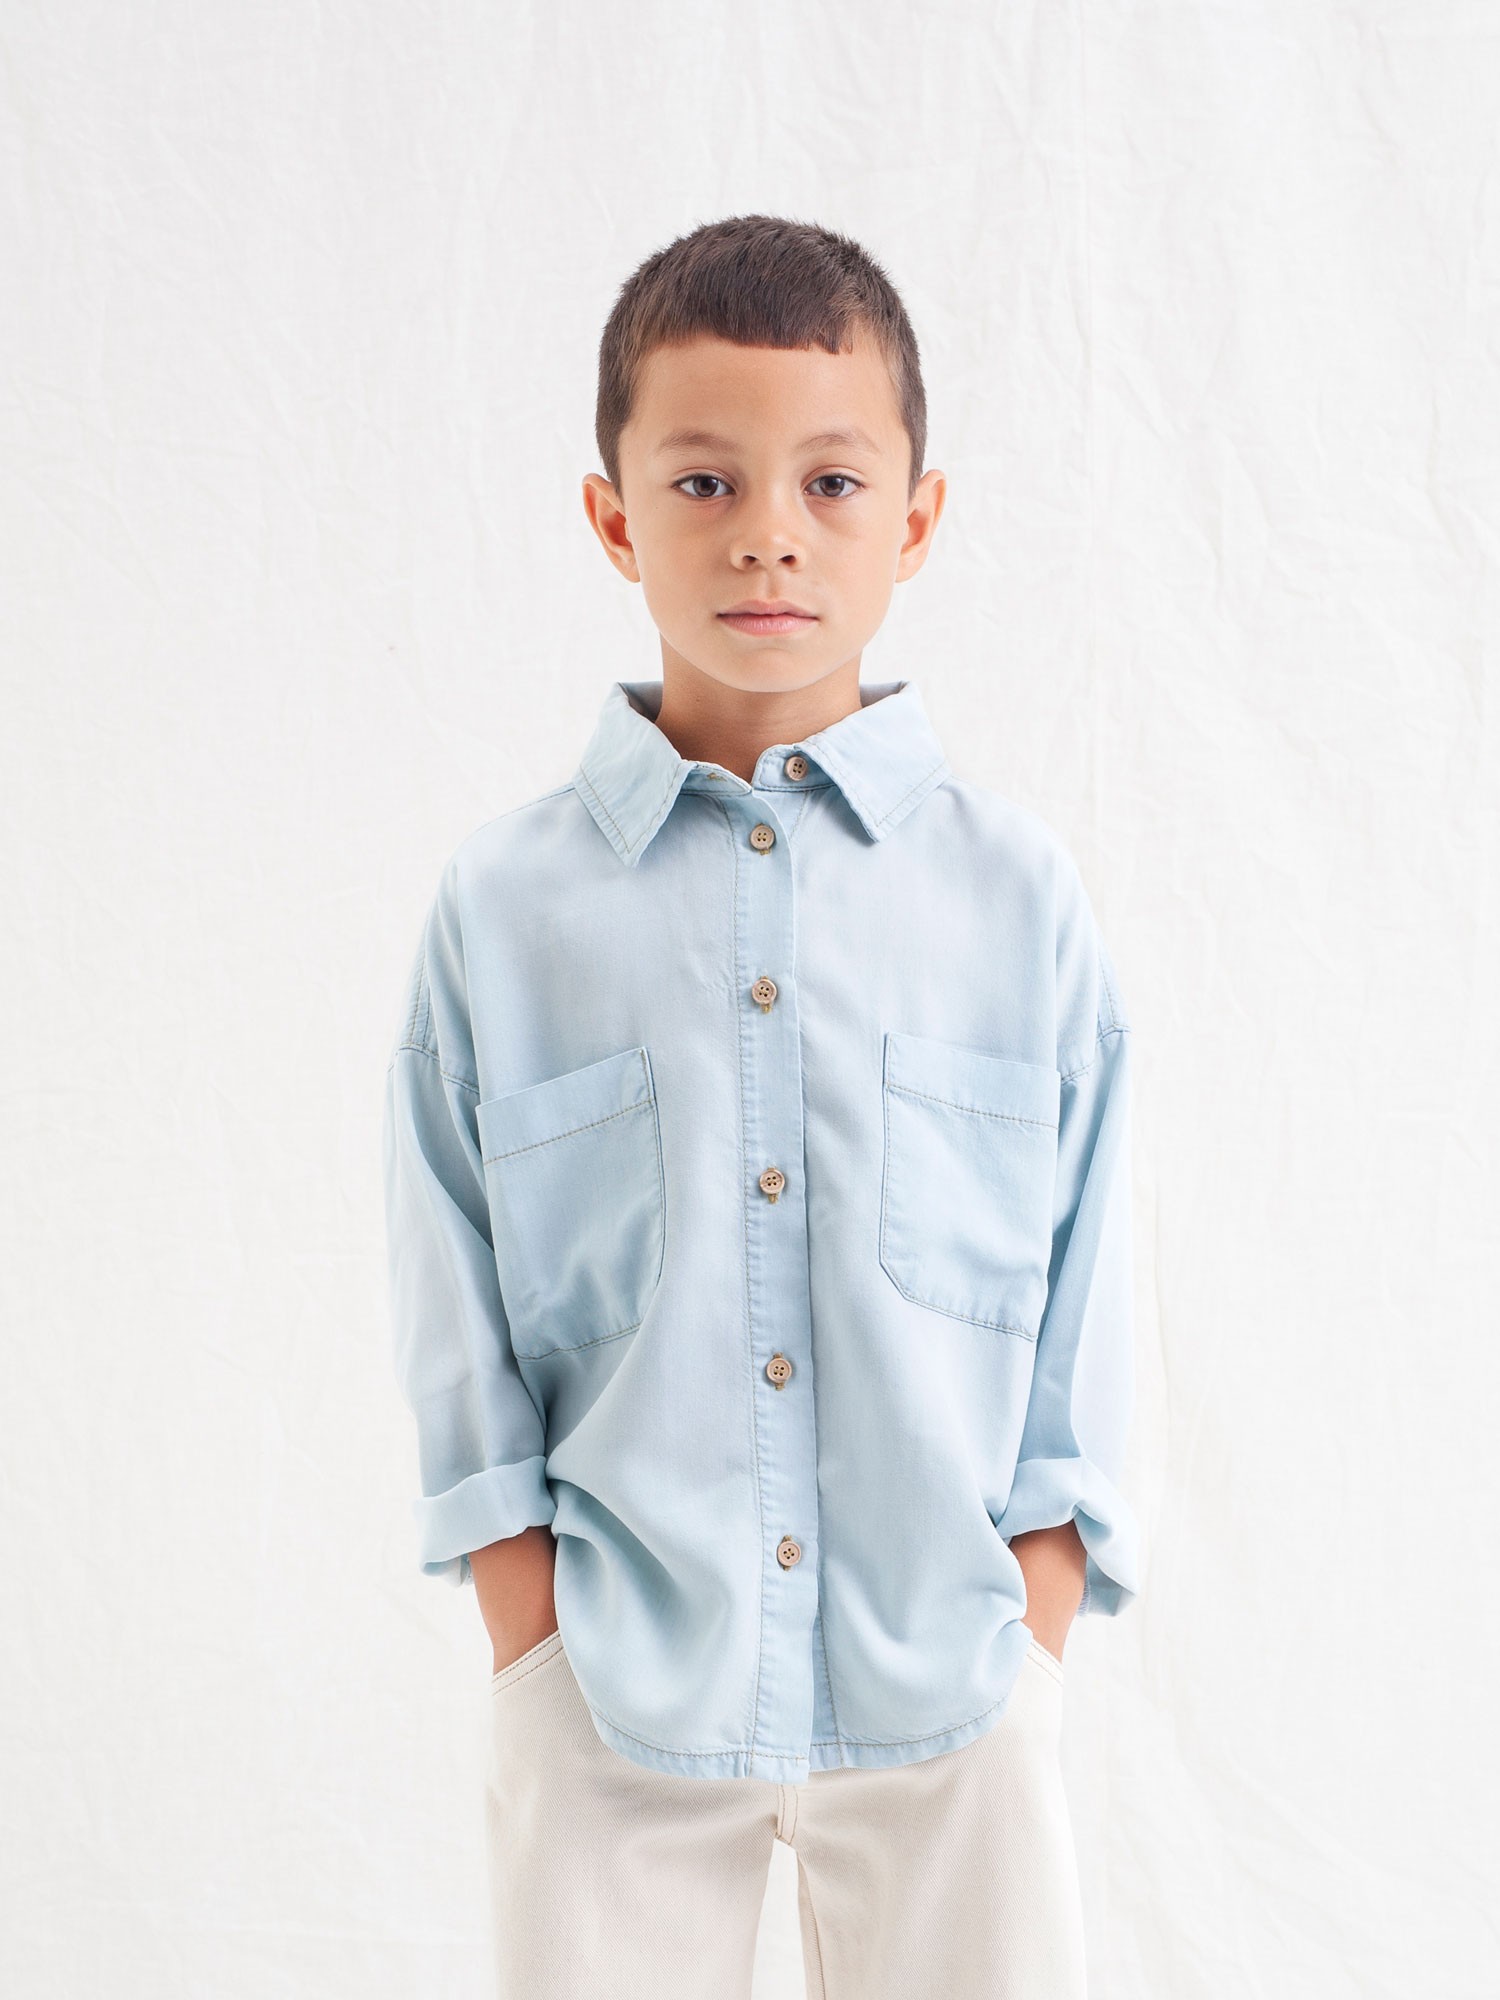 KID LONG SLEEVE SHIRT WITH SHIRT COLLAR WITH POCKETS 1